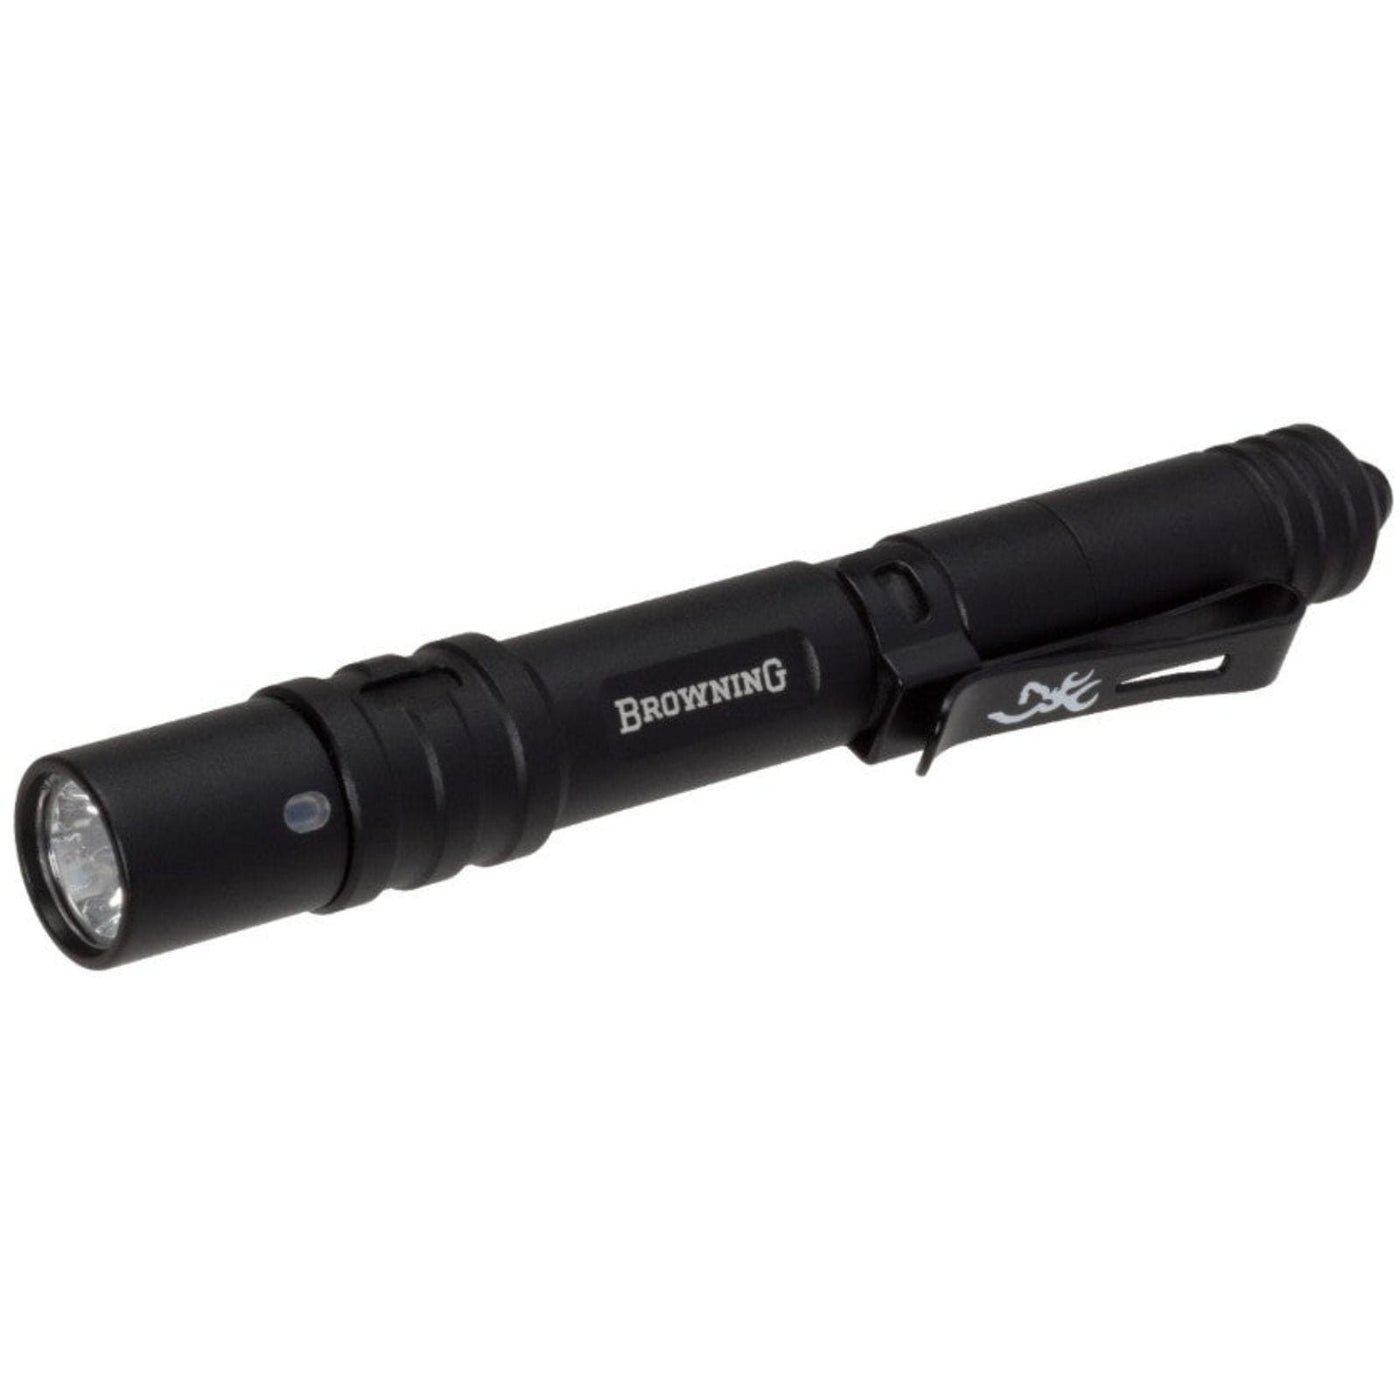 Browning Browning Microblast USB Rechargeable Pen Light Lights